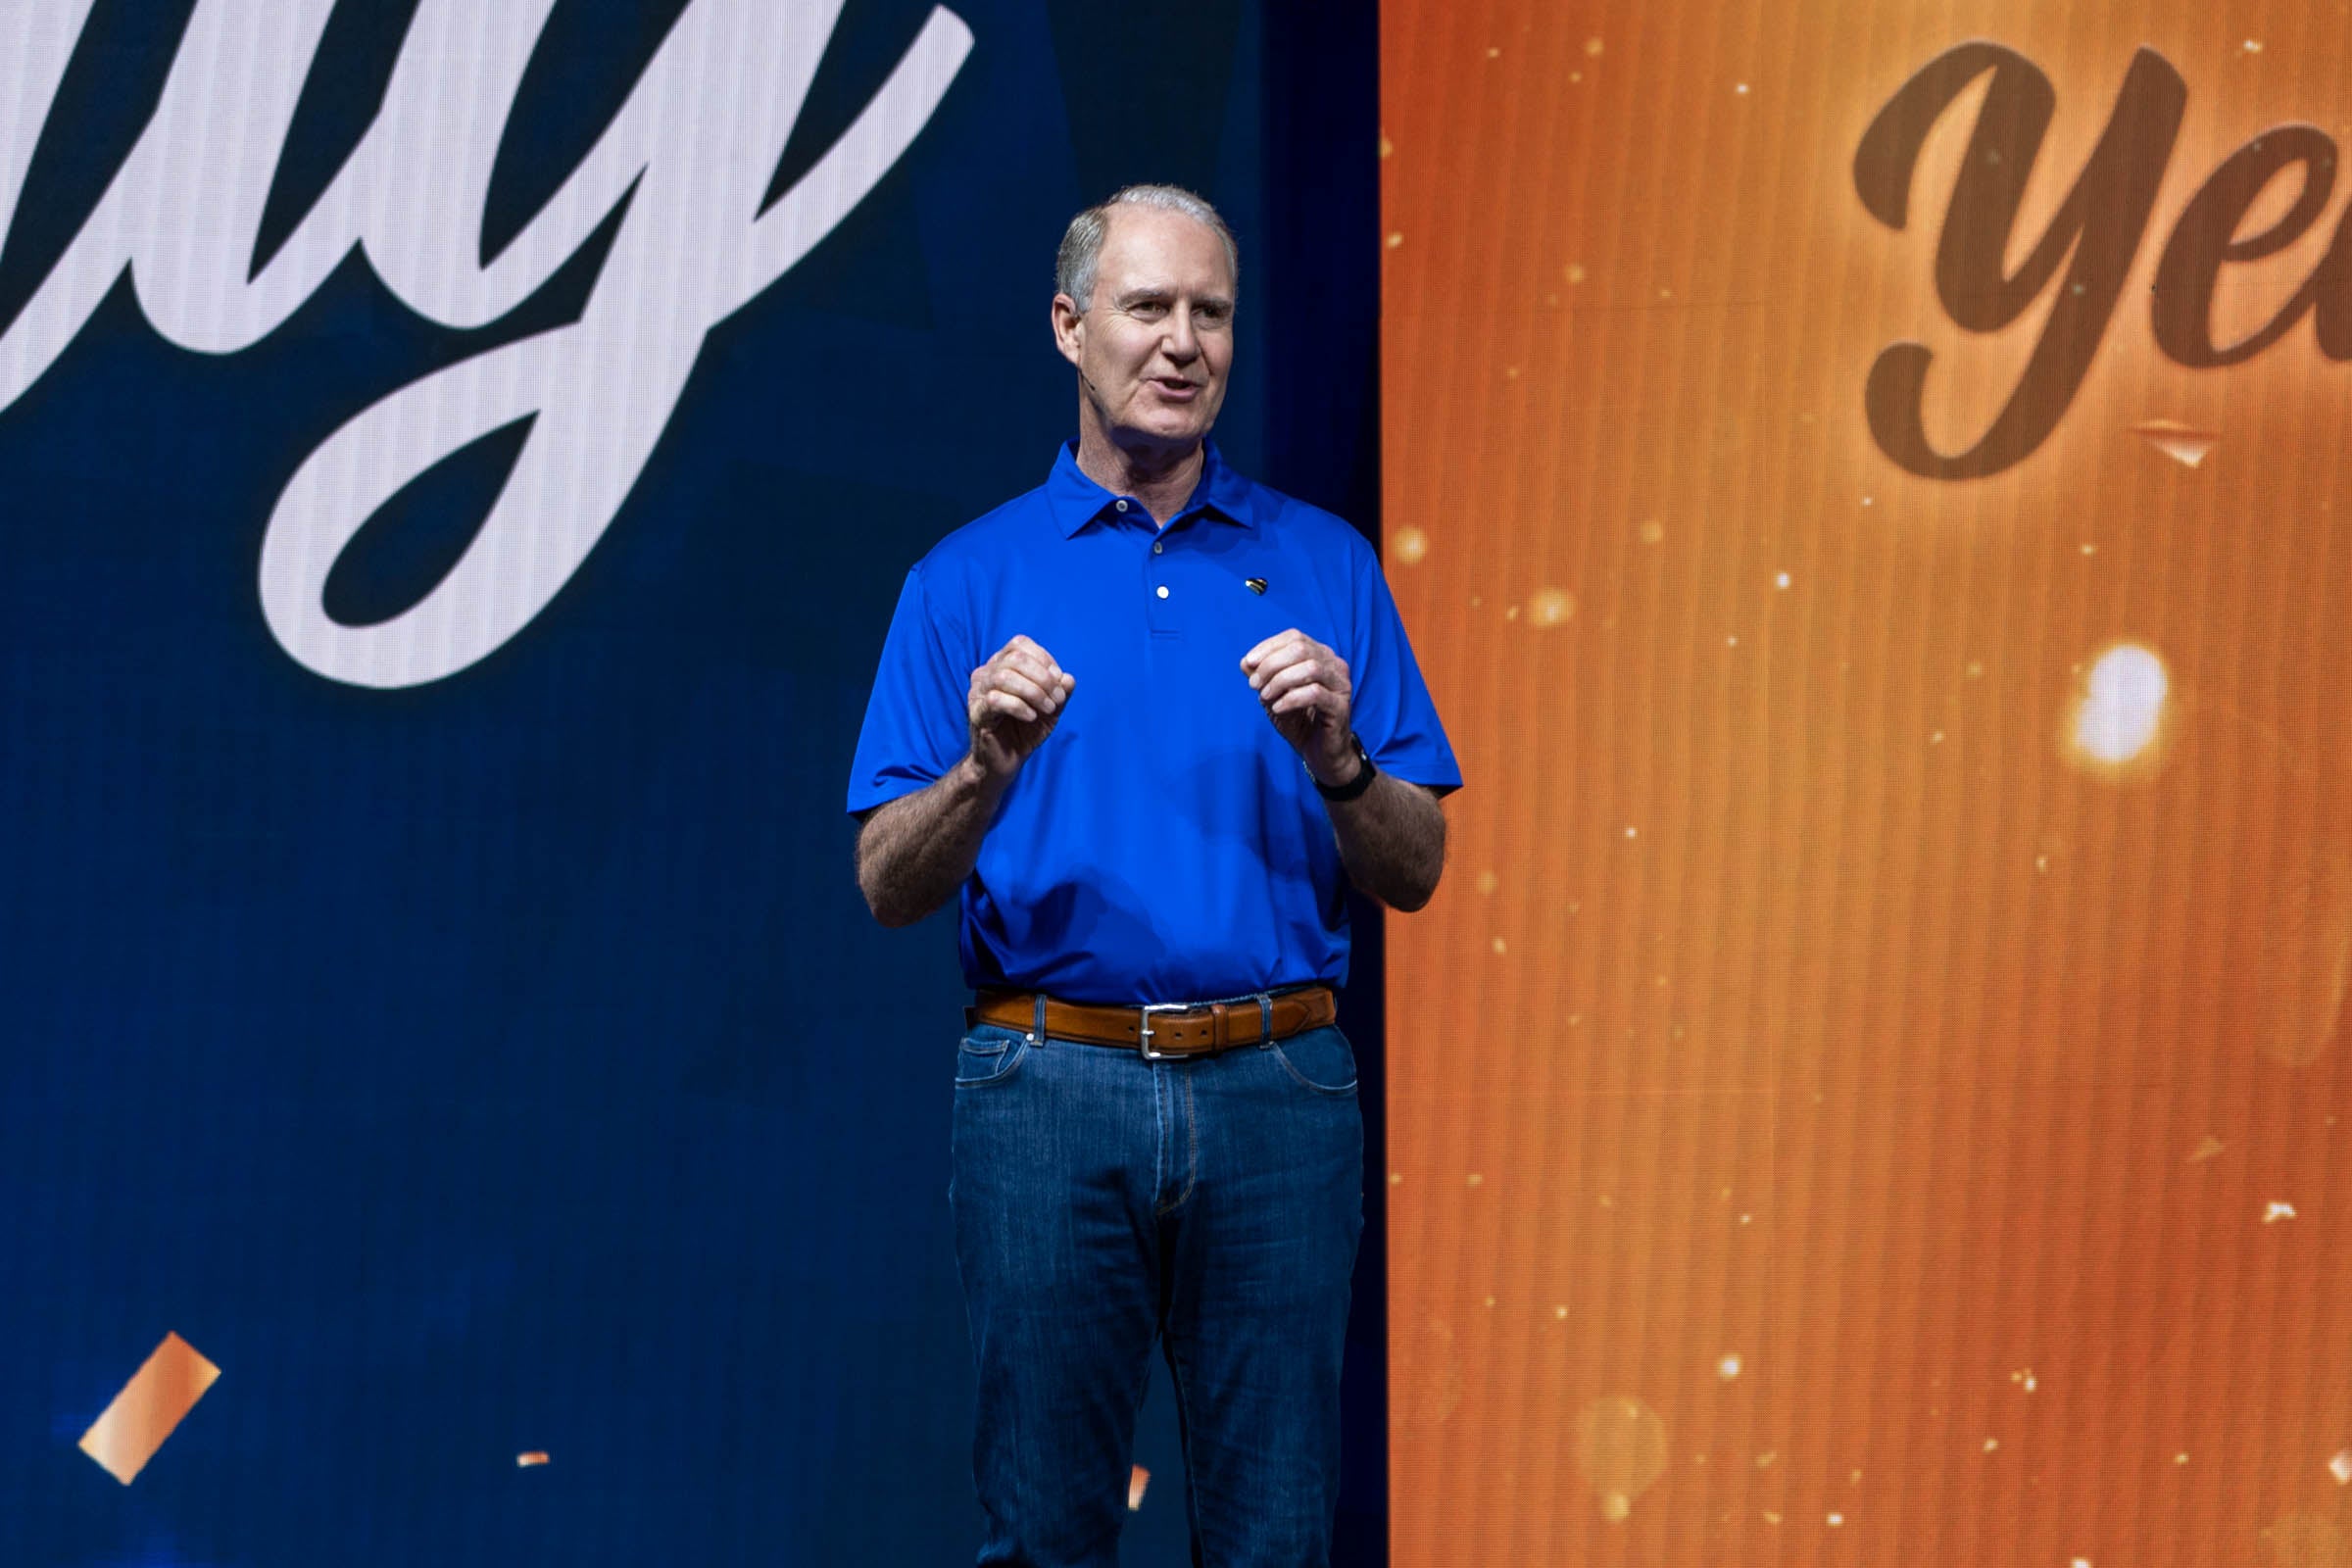 Southwest CEO Gary Kelly speaking on stage at employee event in 2021.